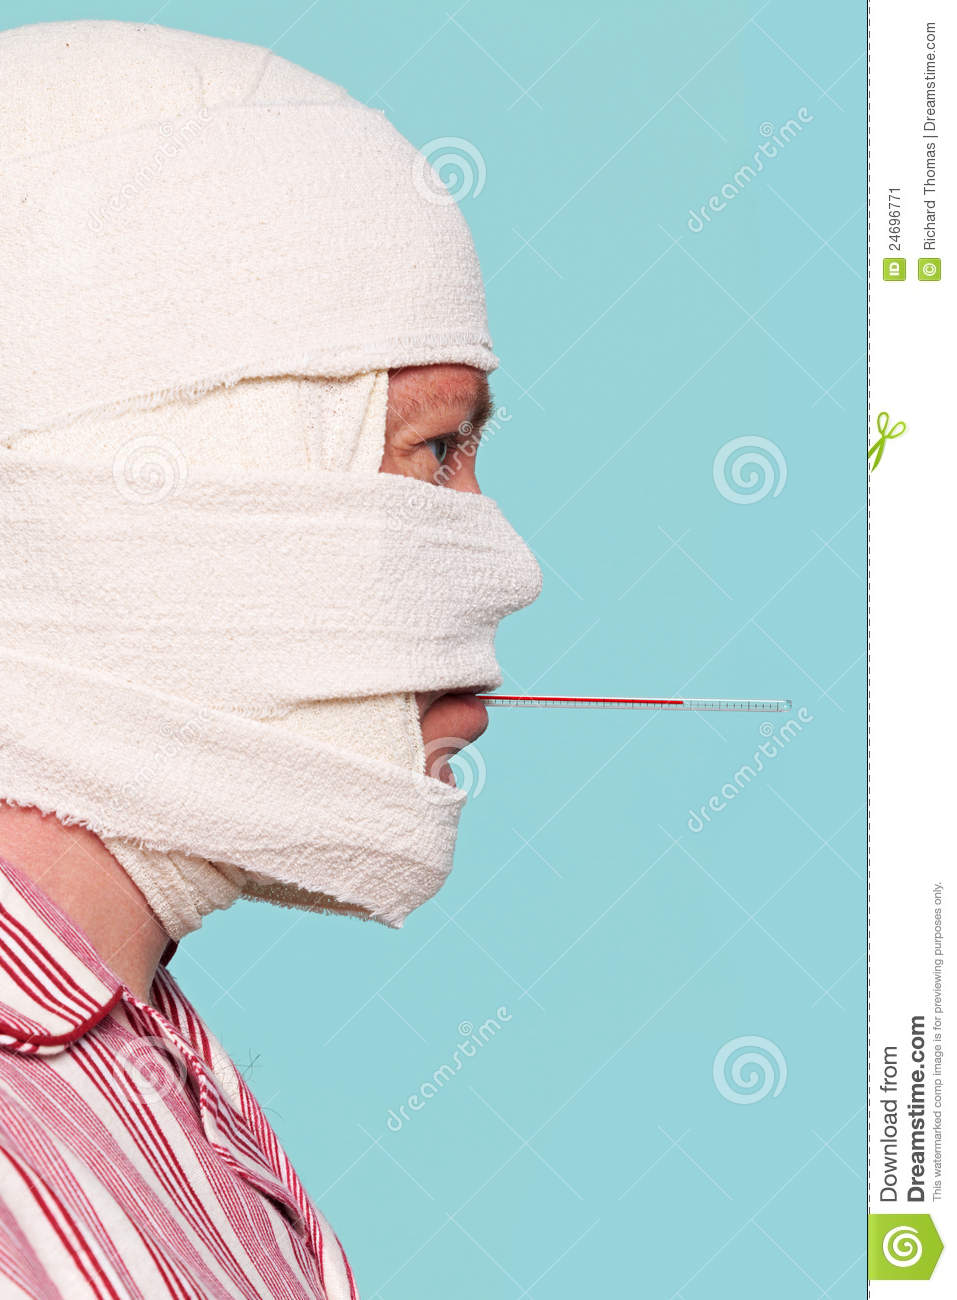 Photo Of A Hospital Patient With A Bandaged Head And A Thermometer In